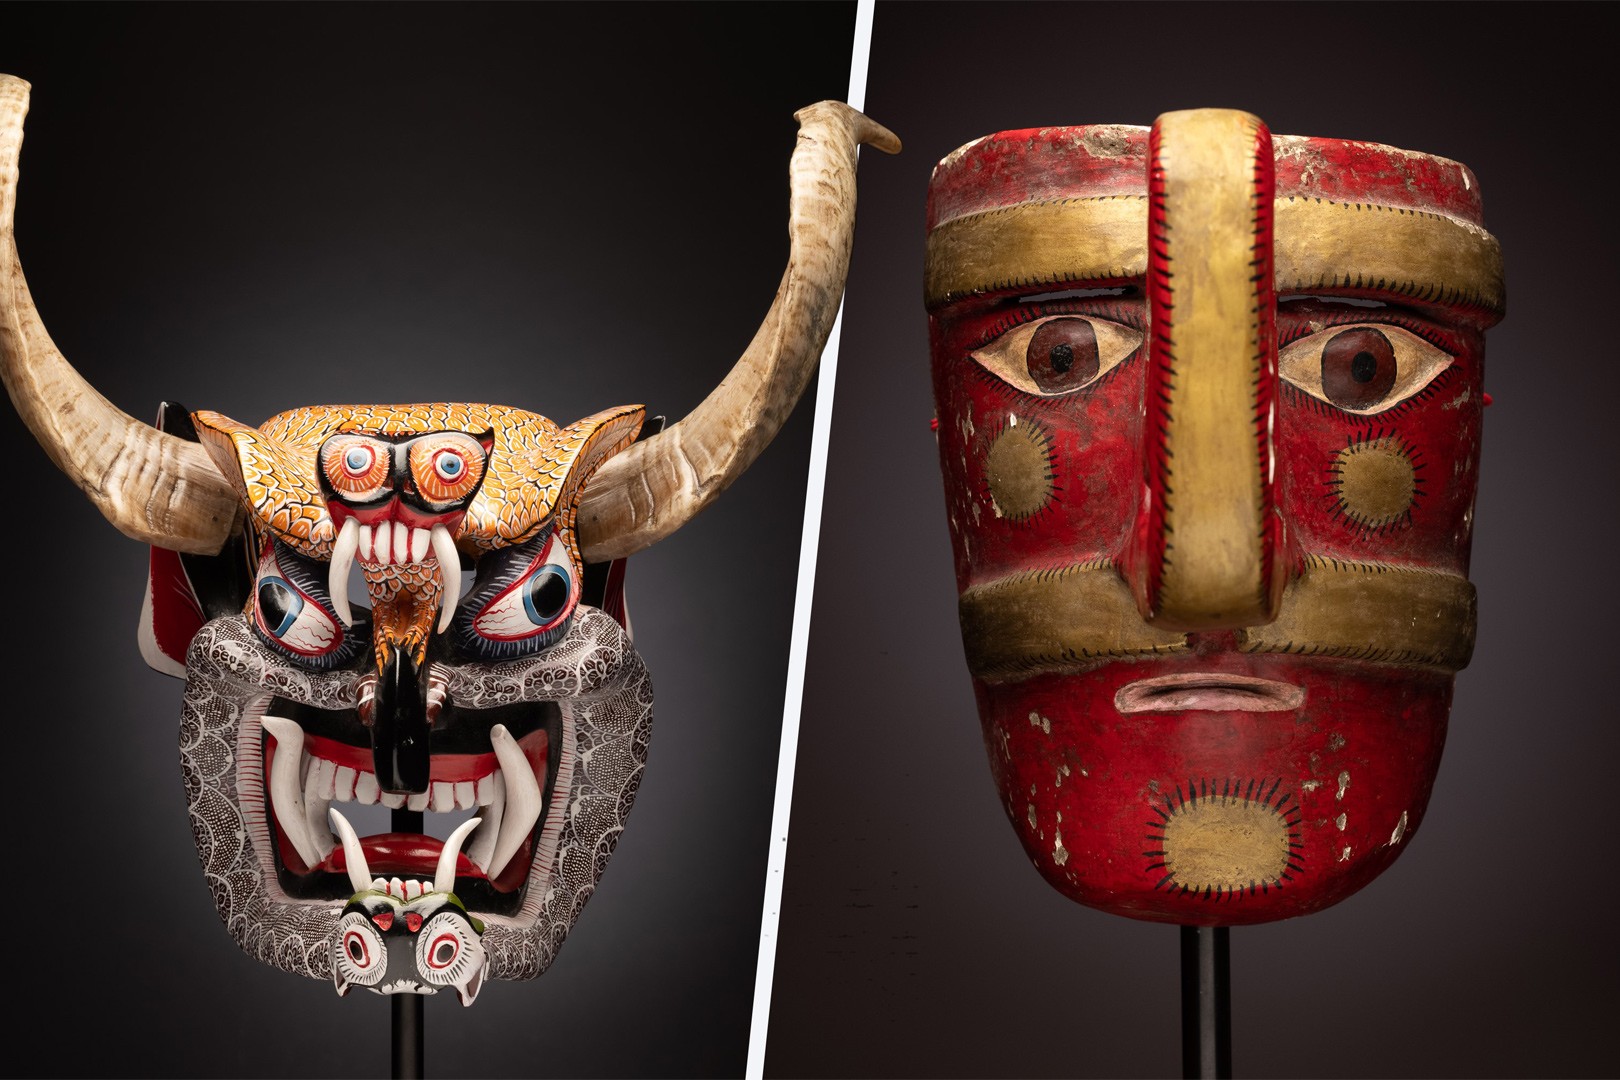 MAC showcases the lively art form of Mexican mask-making and traditional | Arts & Culture | Spokane | The Pacific Northwest Inlander | News, Politics, Music, Calendar, Events in Spokane,